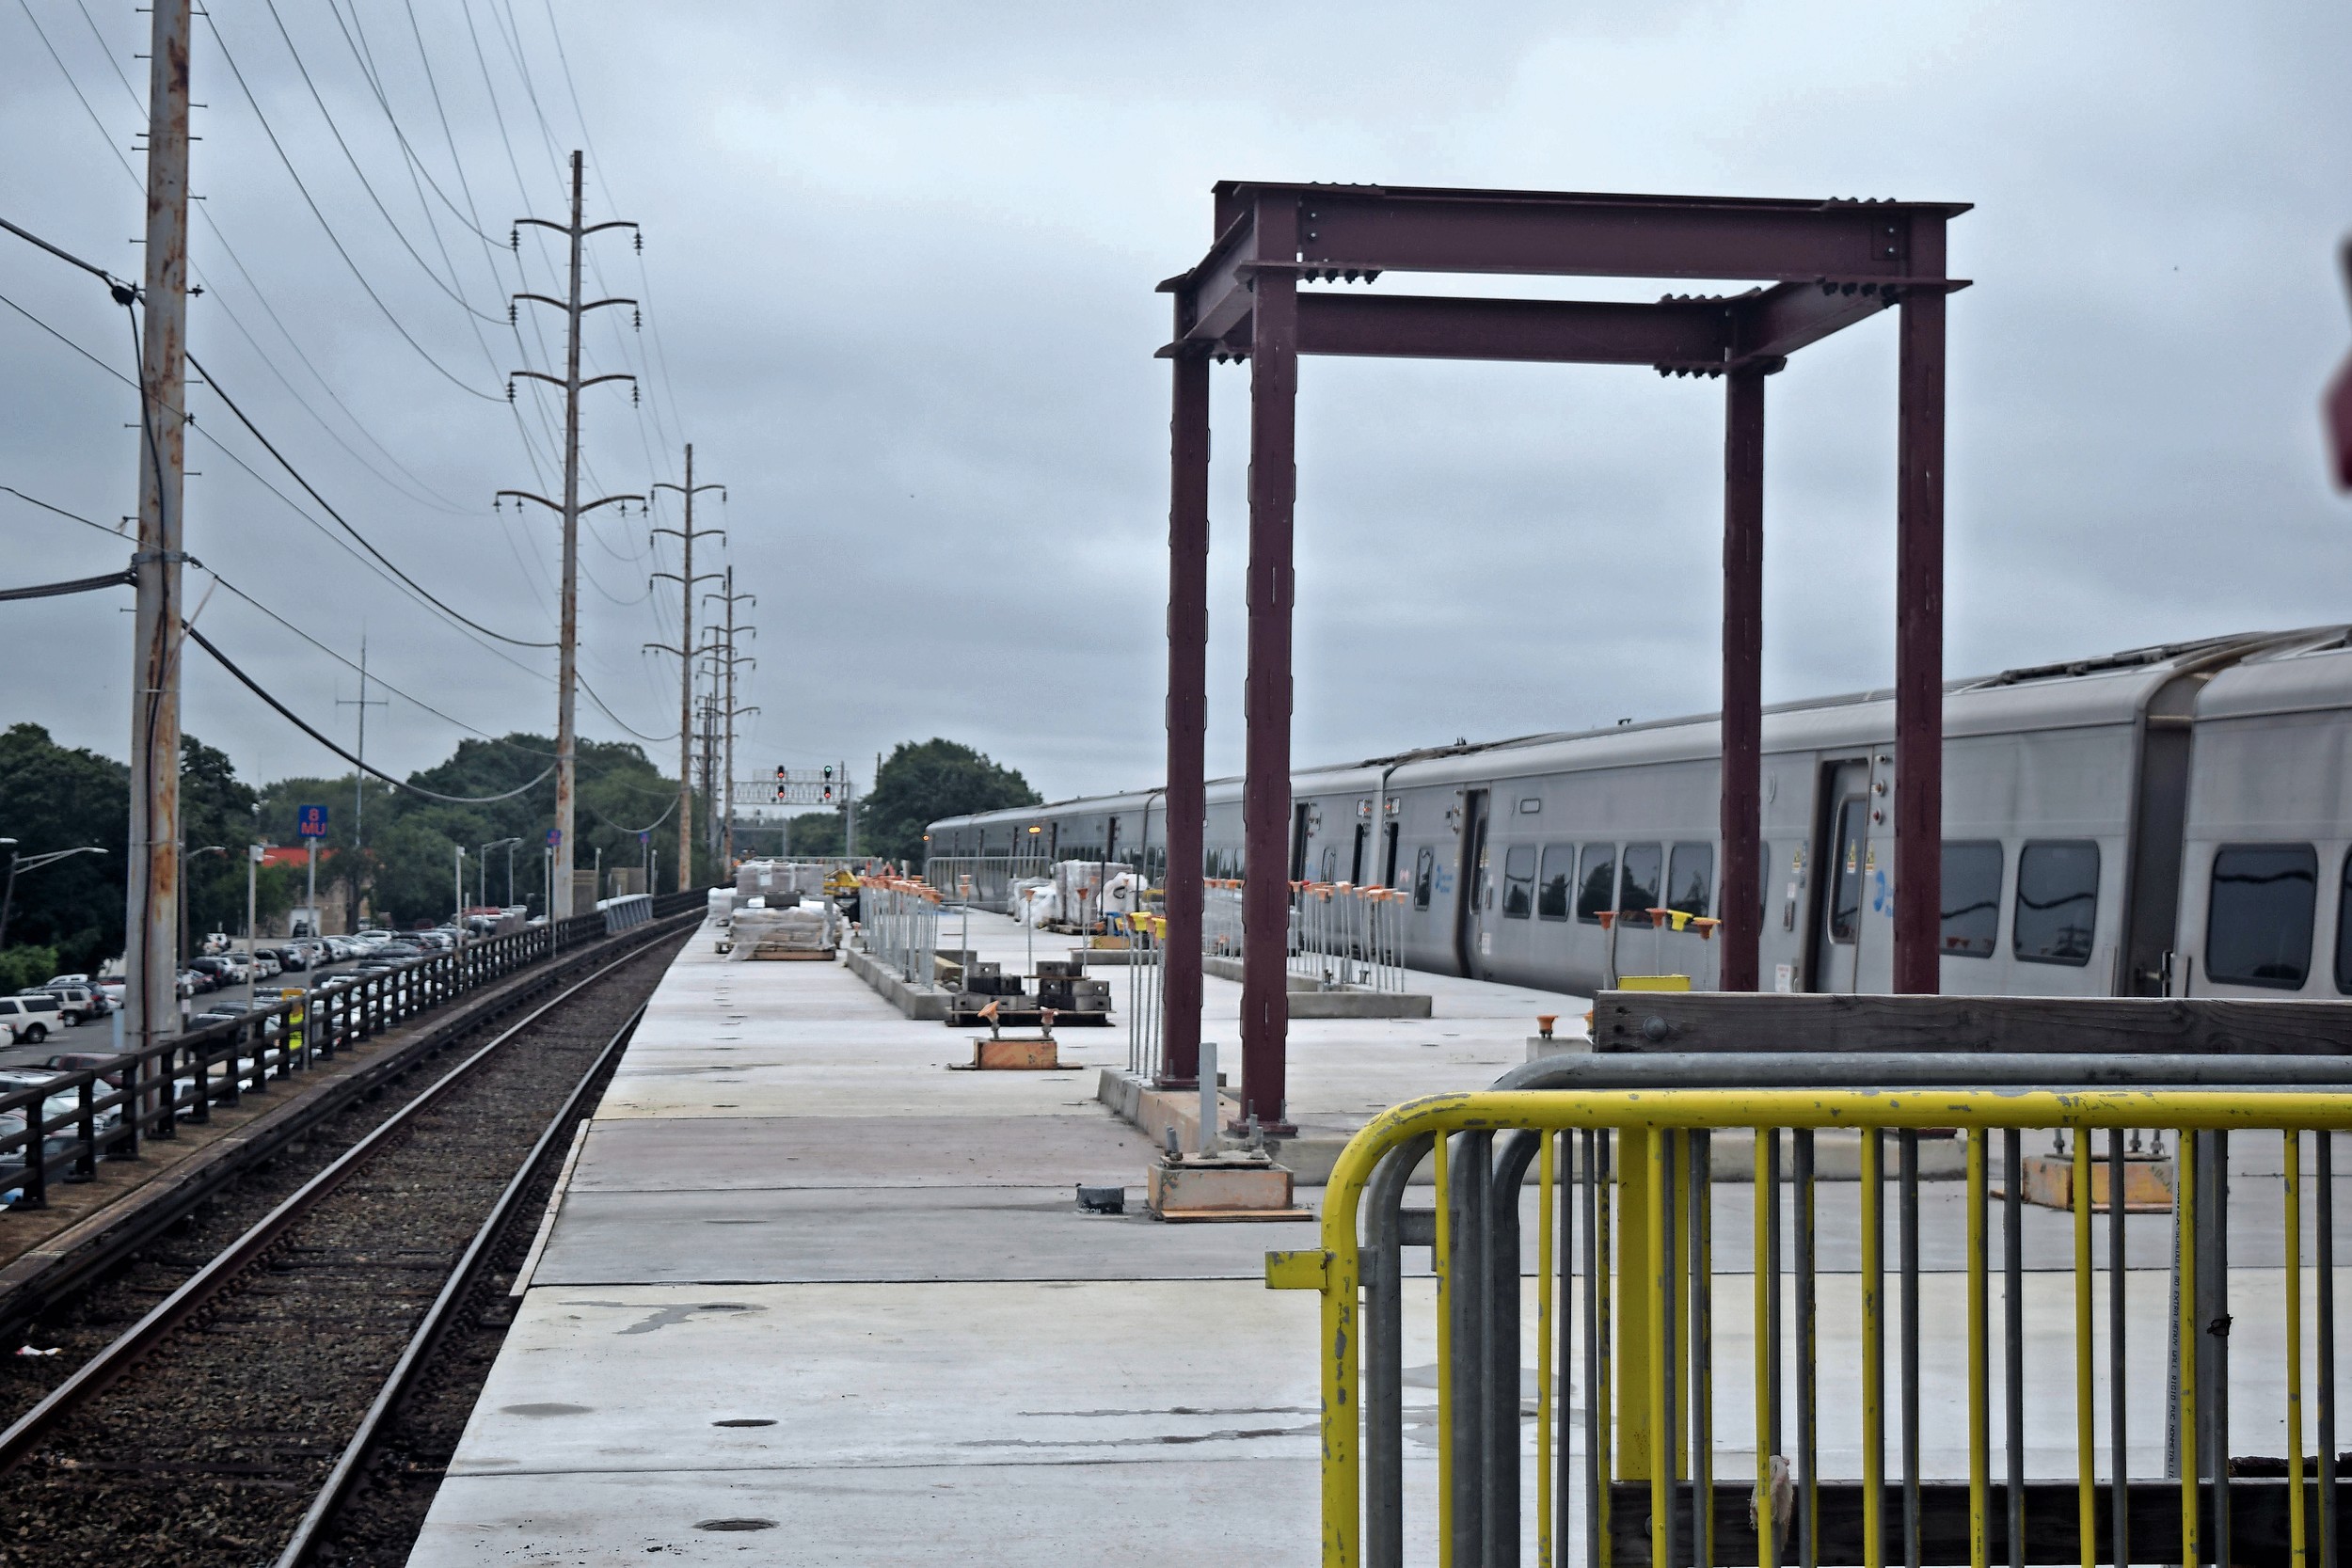 The Long Island Rail Road is about halfway through its $23.9 million rehabilitation of the Wantagh station.